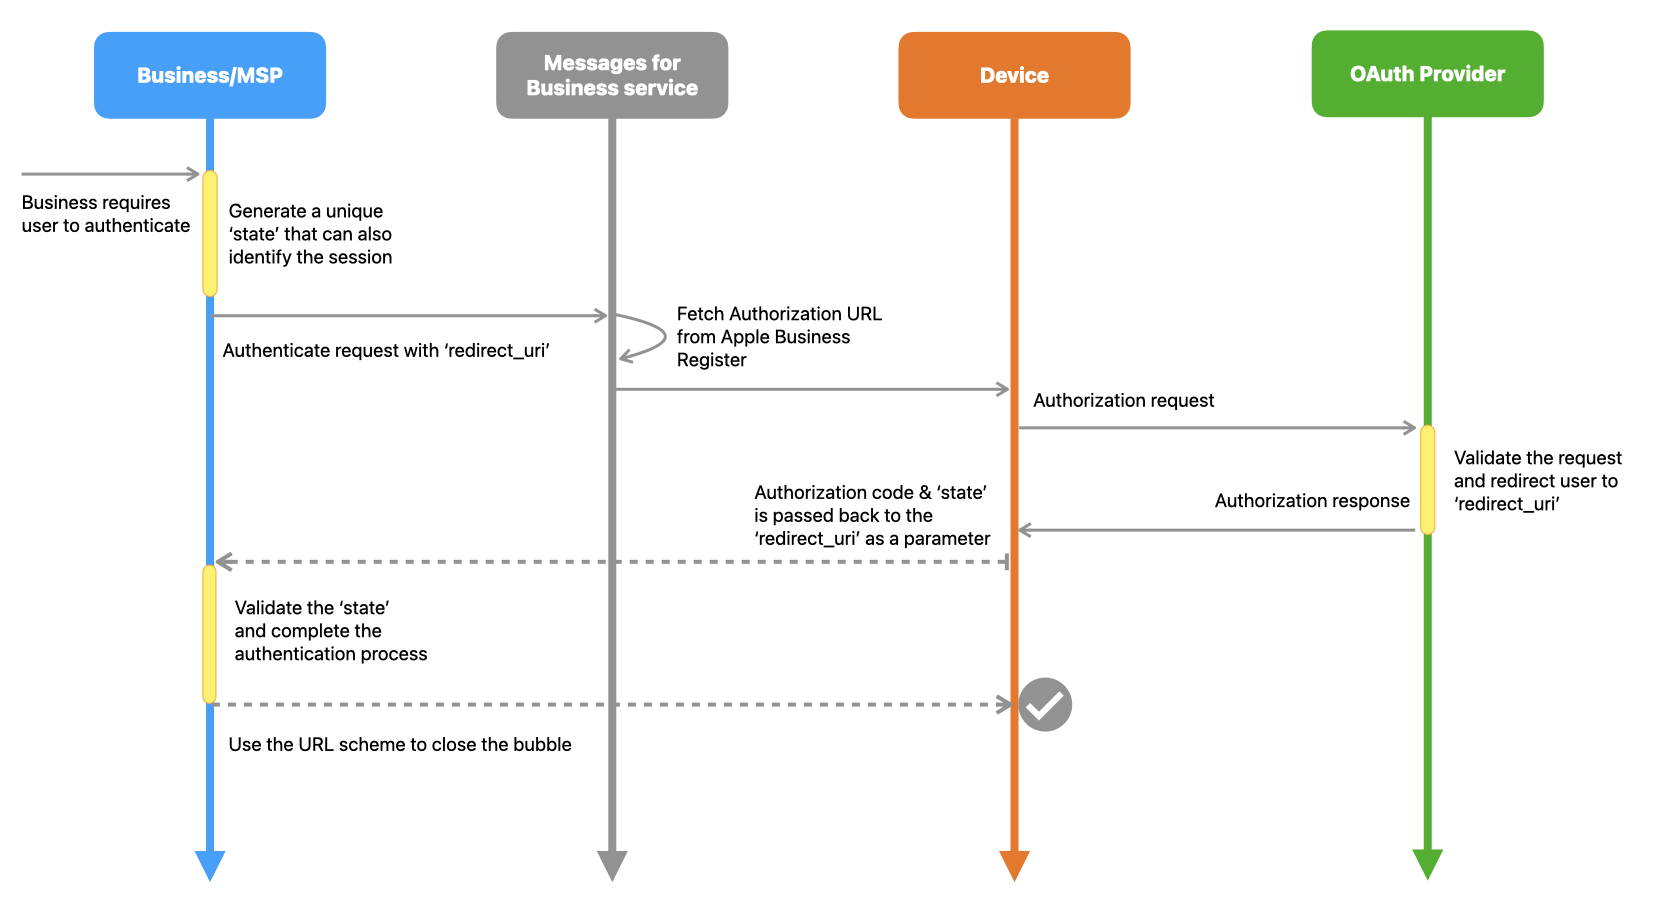 The new authentication flow